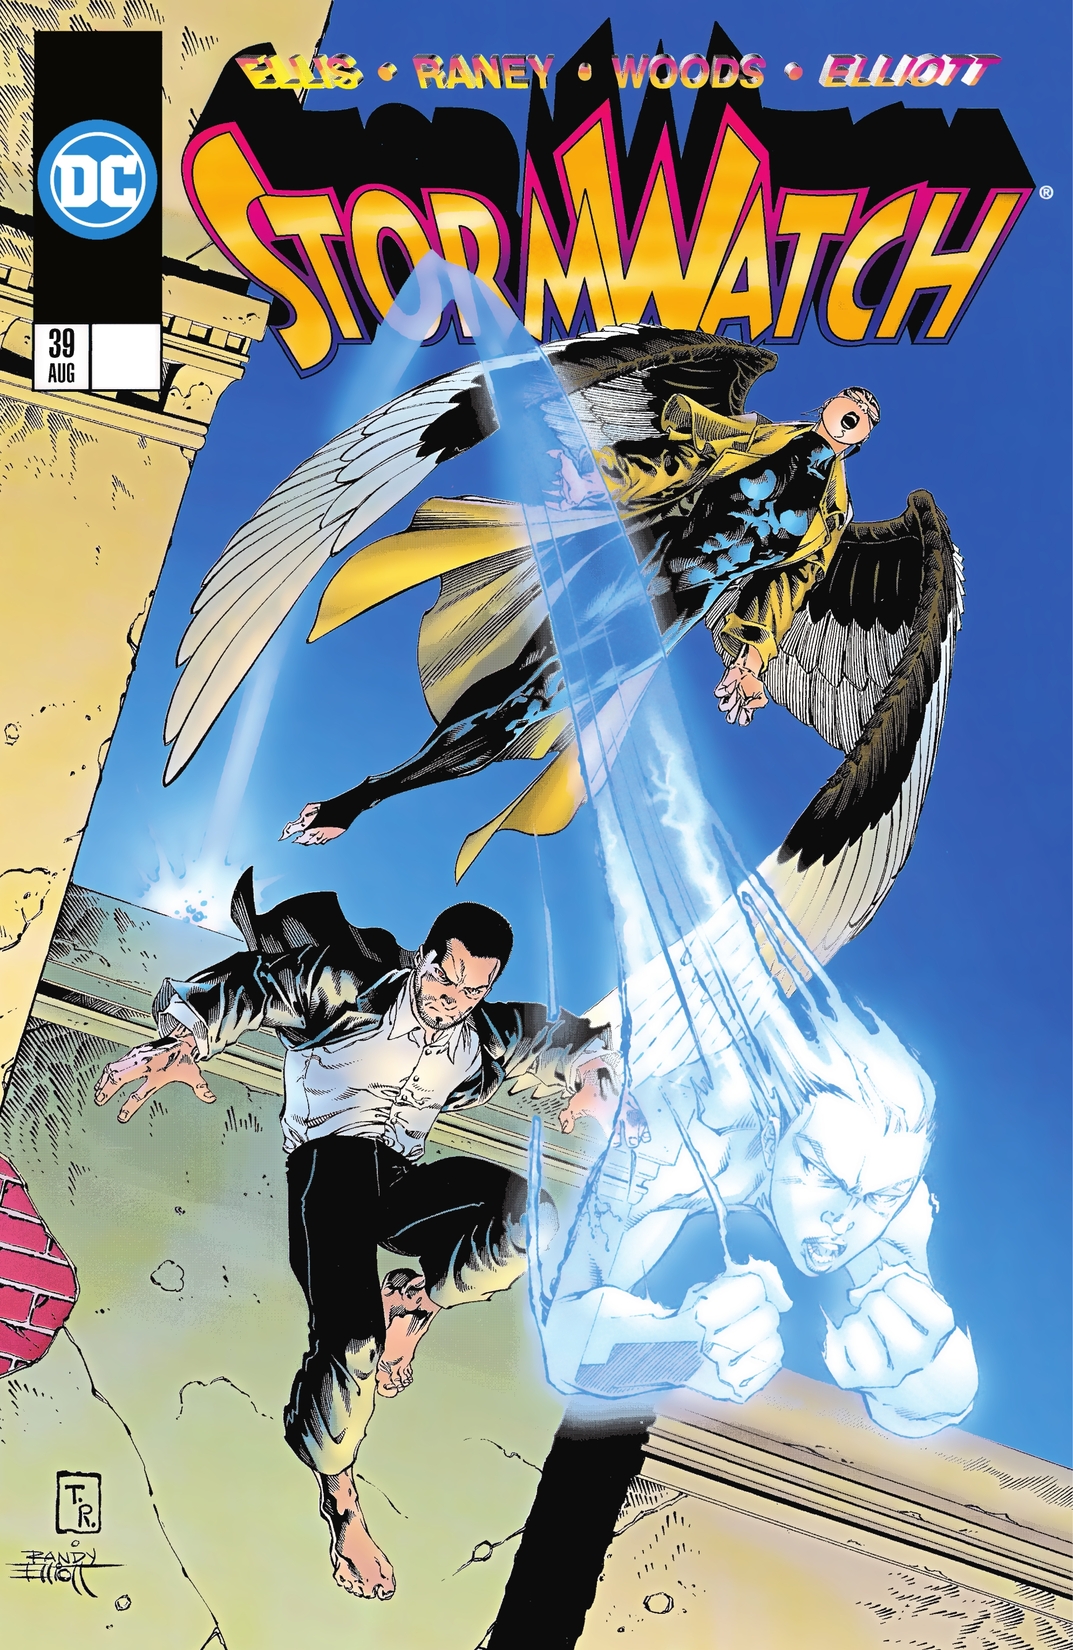 Stormwatch (1993-1997) #39 preview images